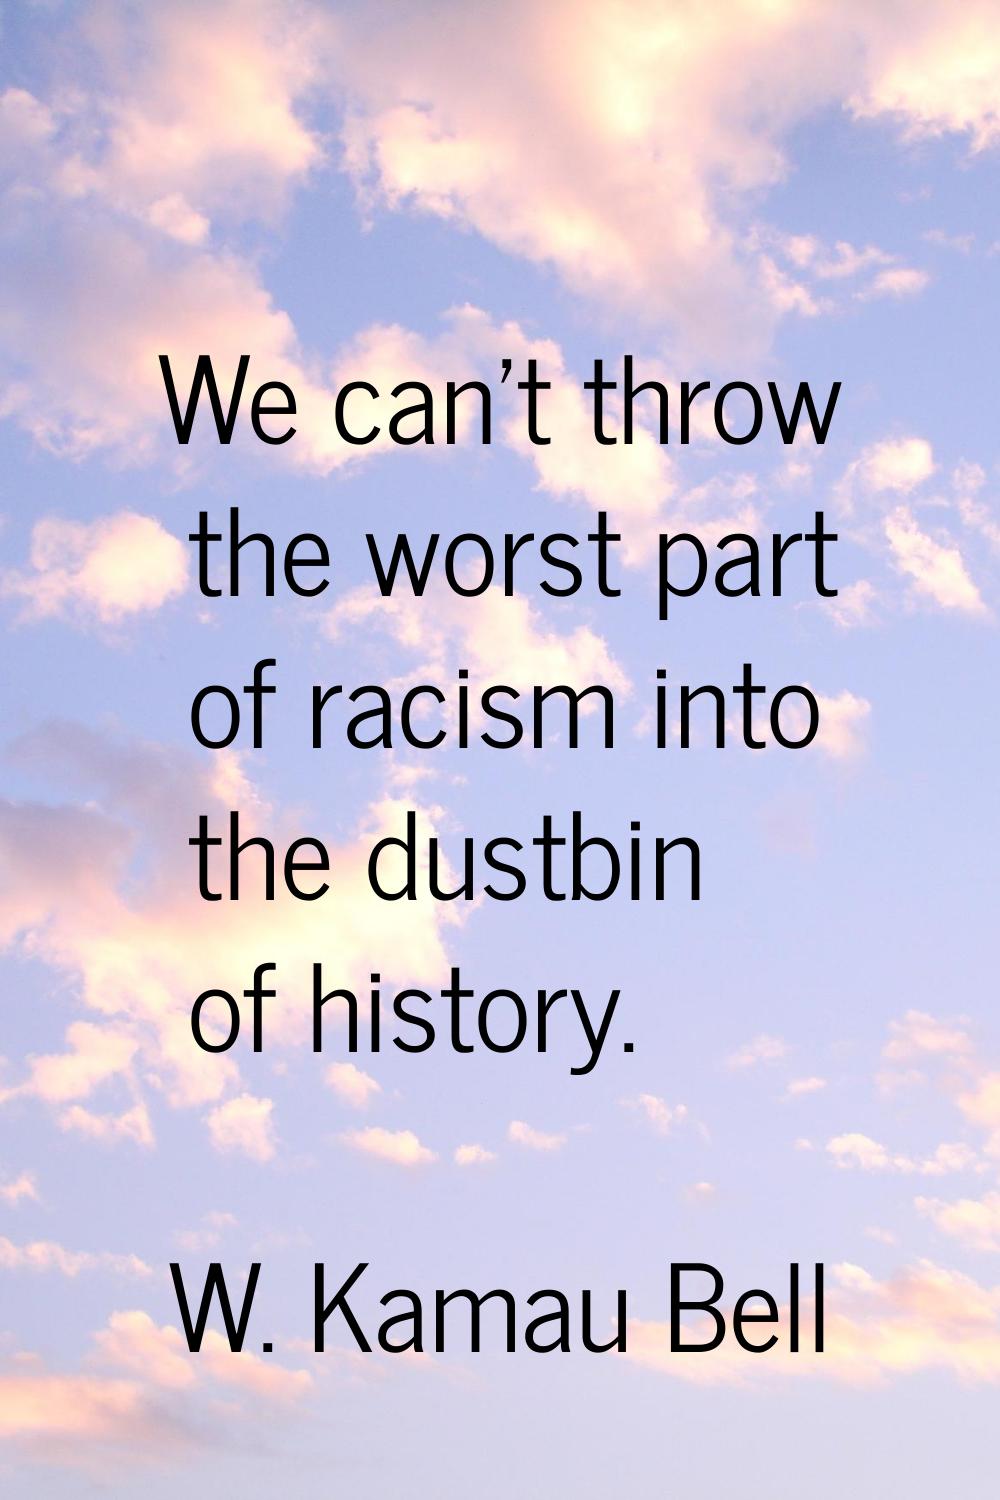 We can't throw the worst part of racism into the dustbin of history.